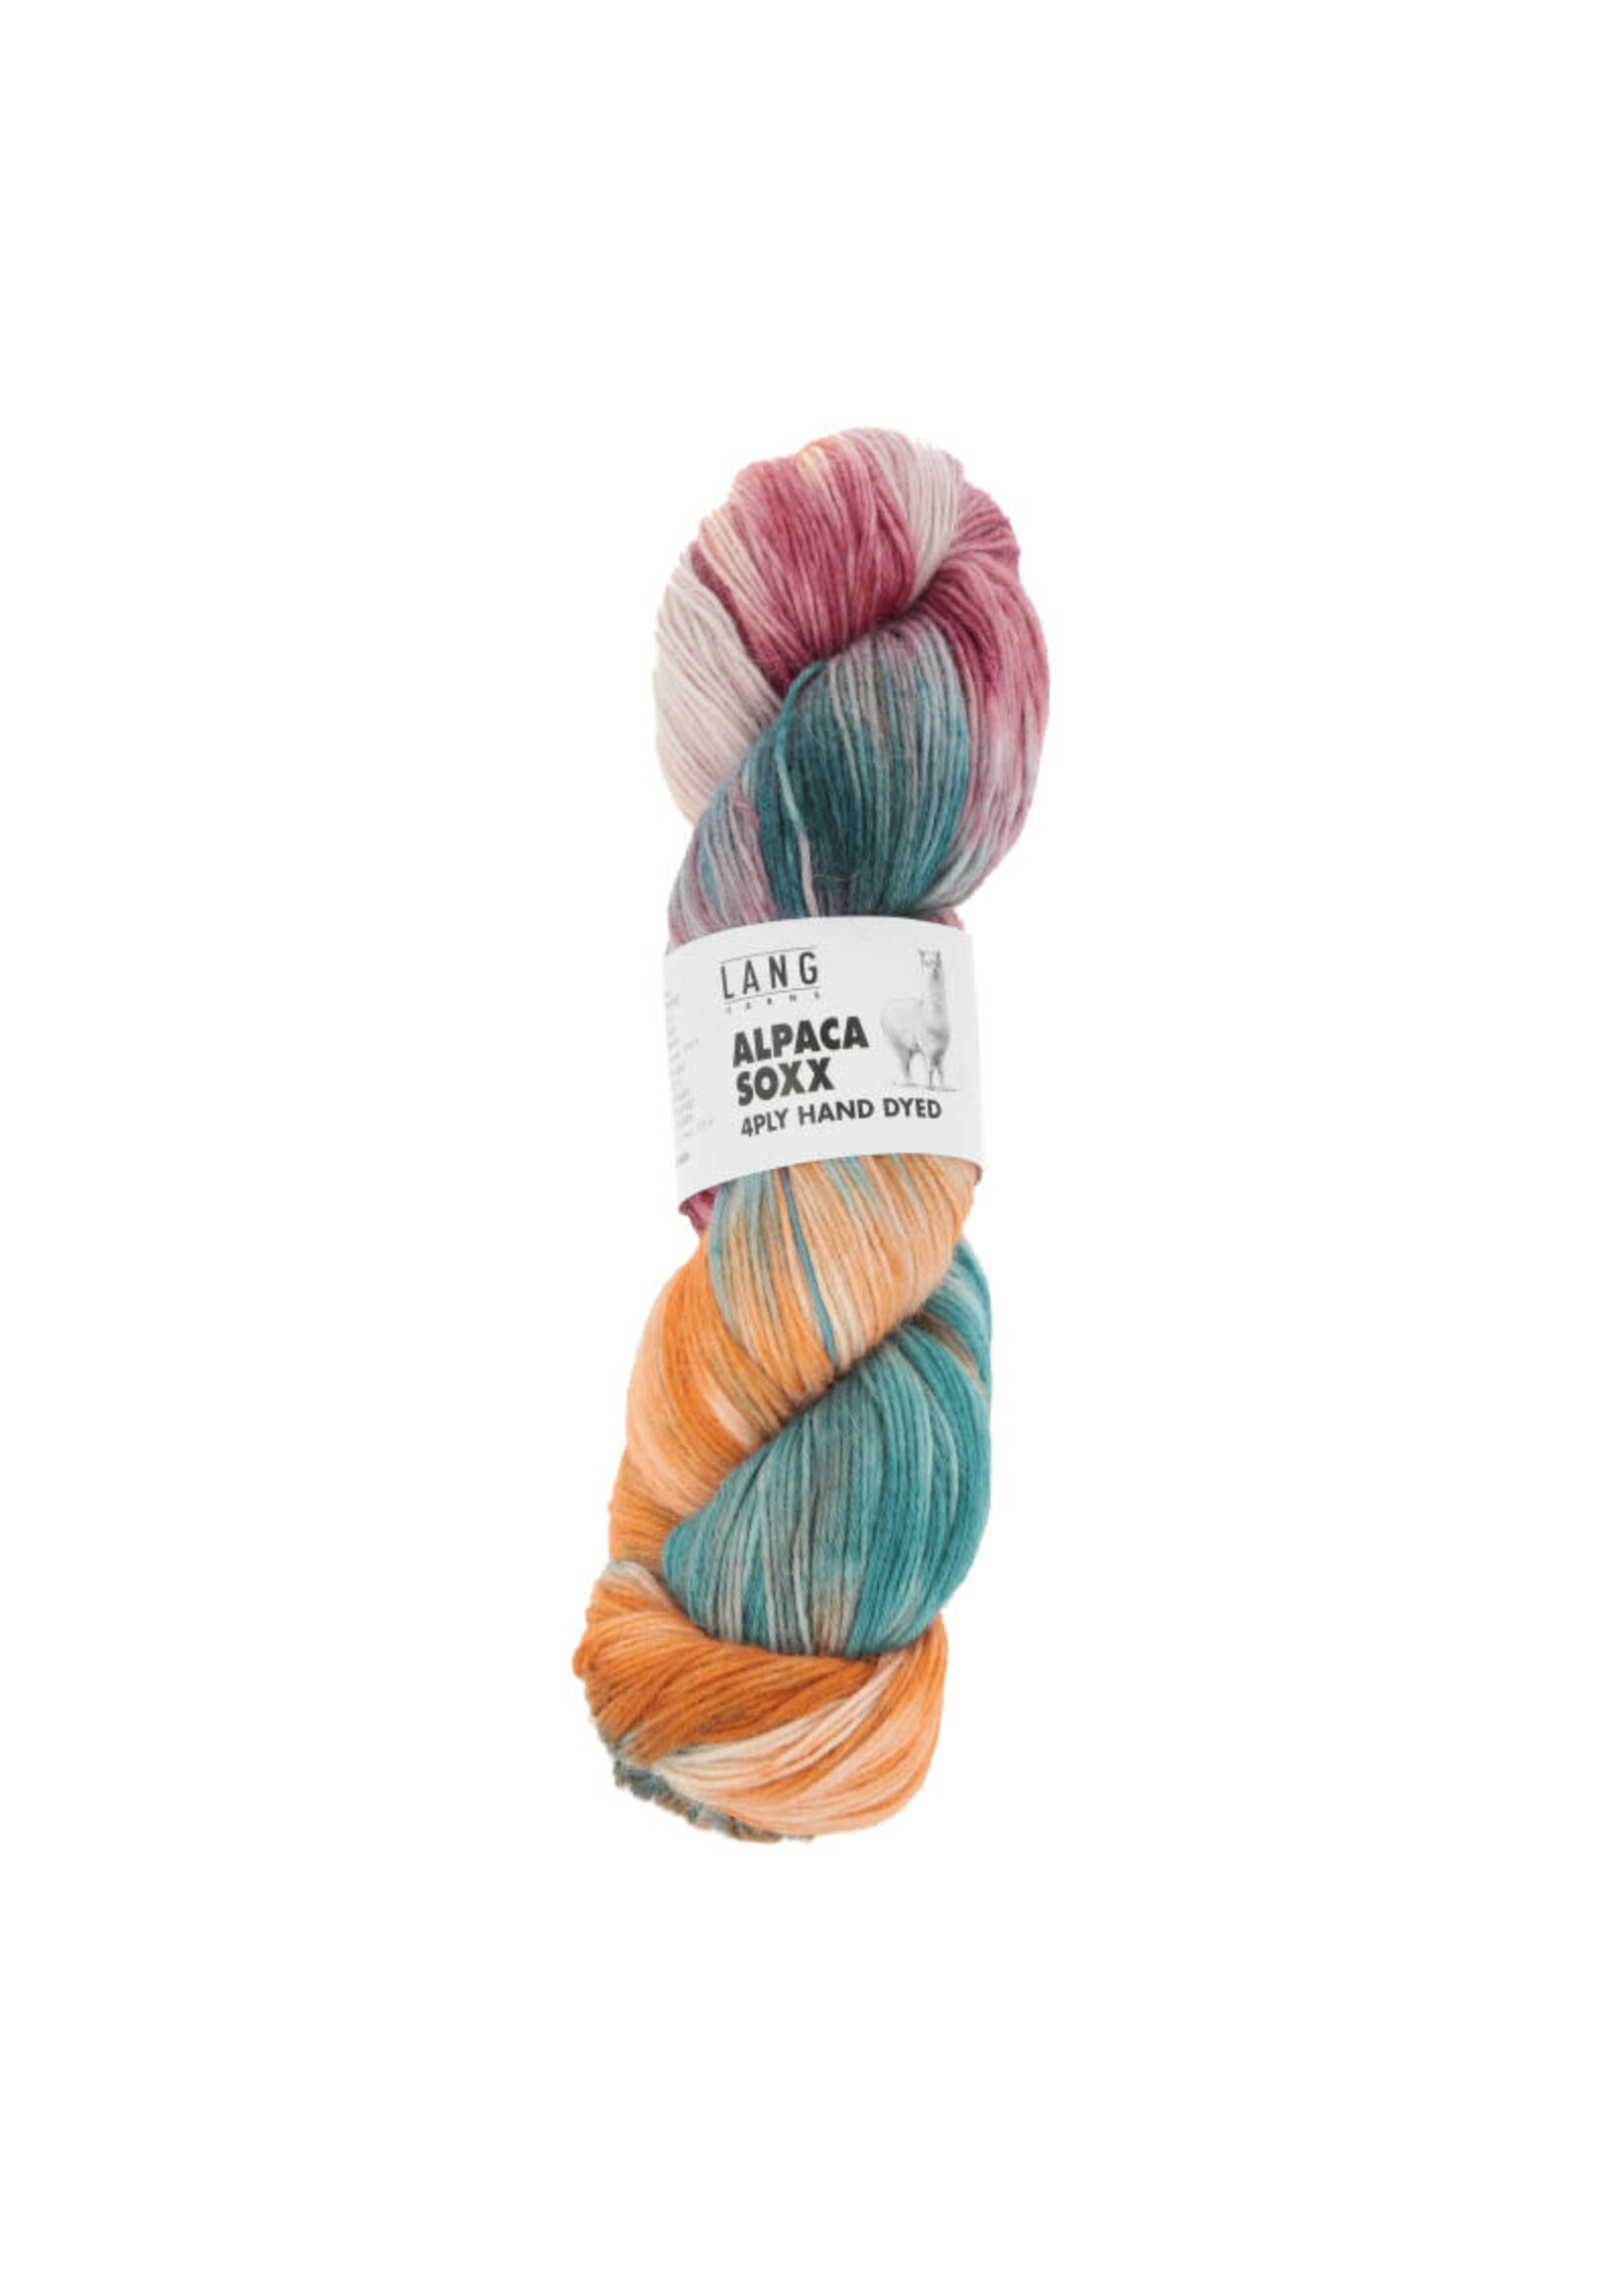 LangYarns Alpaca Soxx 4-ply Hand Dyed - 0006 Oranje/turquoise/rose